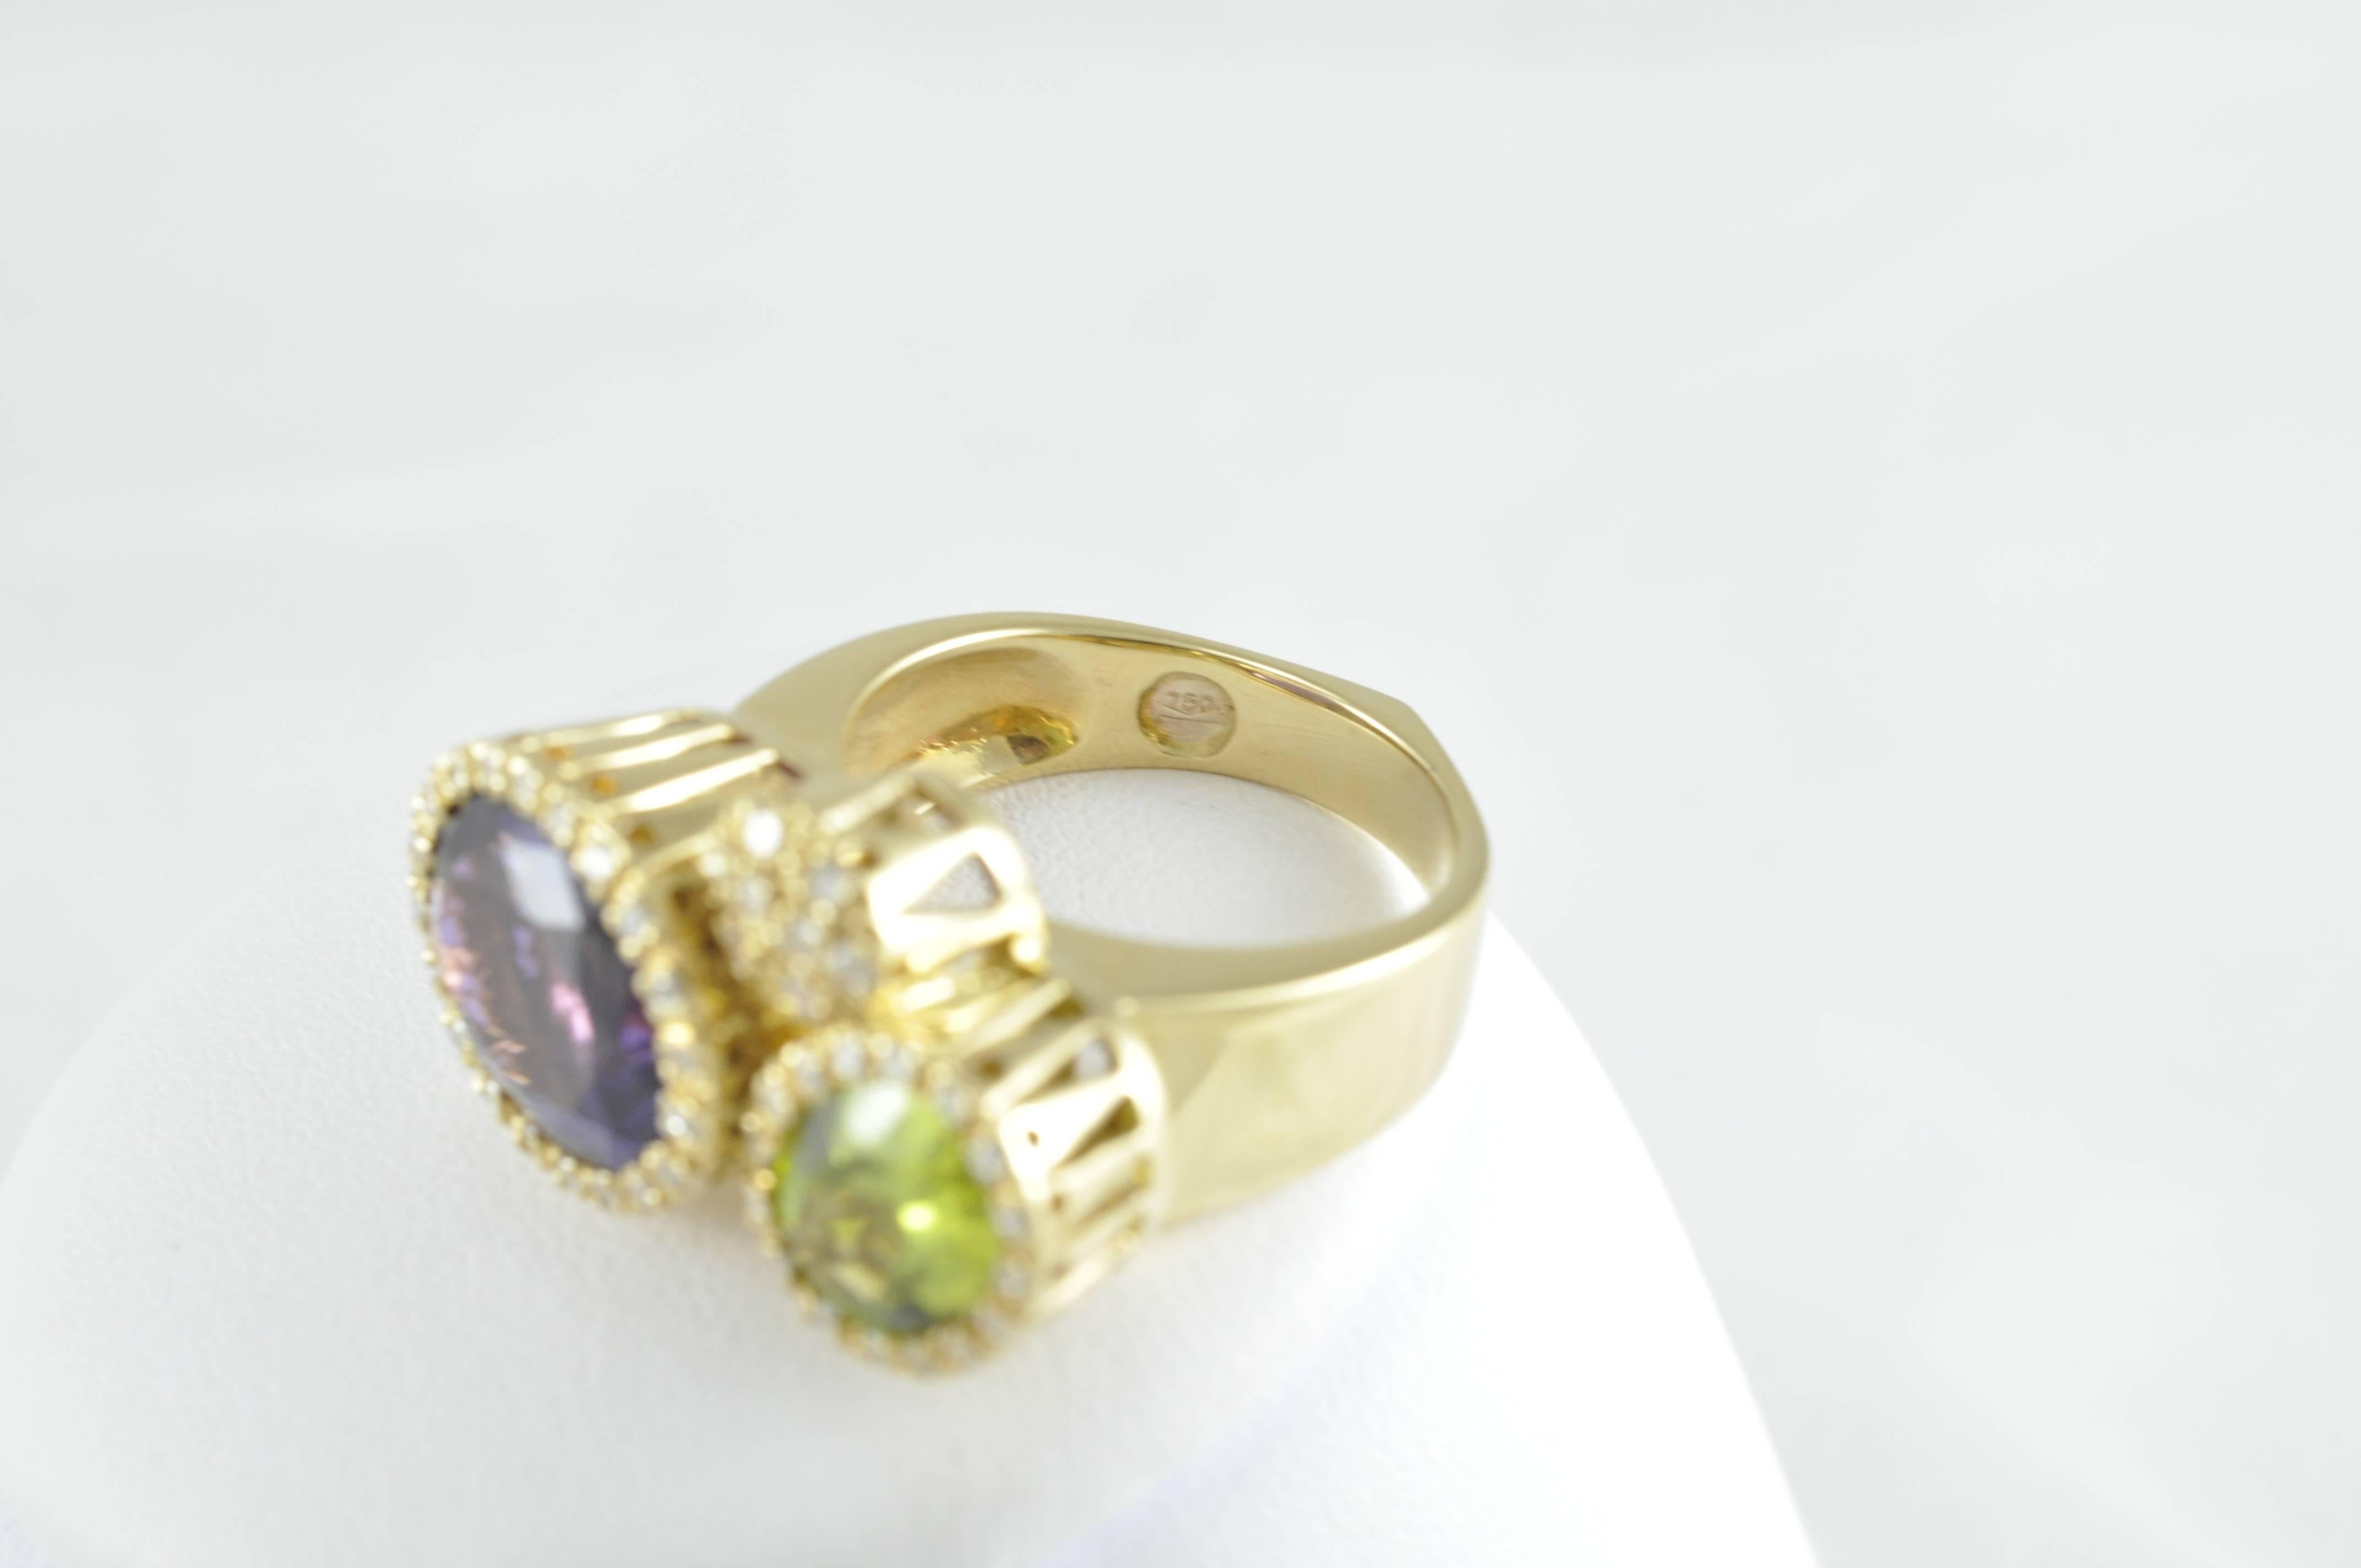 18k Ring featuring oval Amethyst and oval Peridot surrounded by Round Diamonds, with a third round section of Round Diamonds. The ring is stamped 750 also has initials MM and PVG on under gallery for designer Ponte Vecchio Gioielli.
The ring is